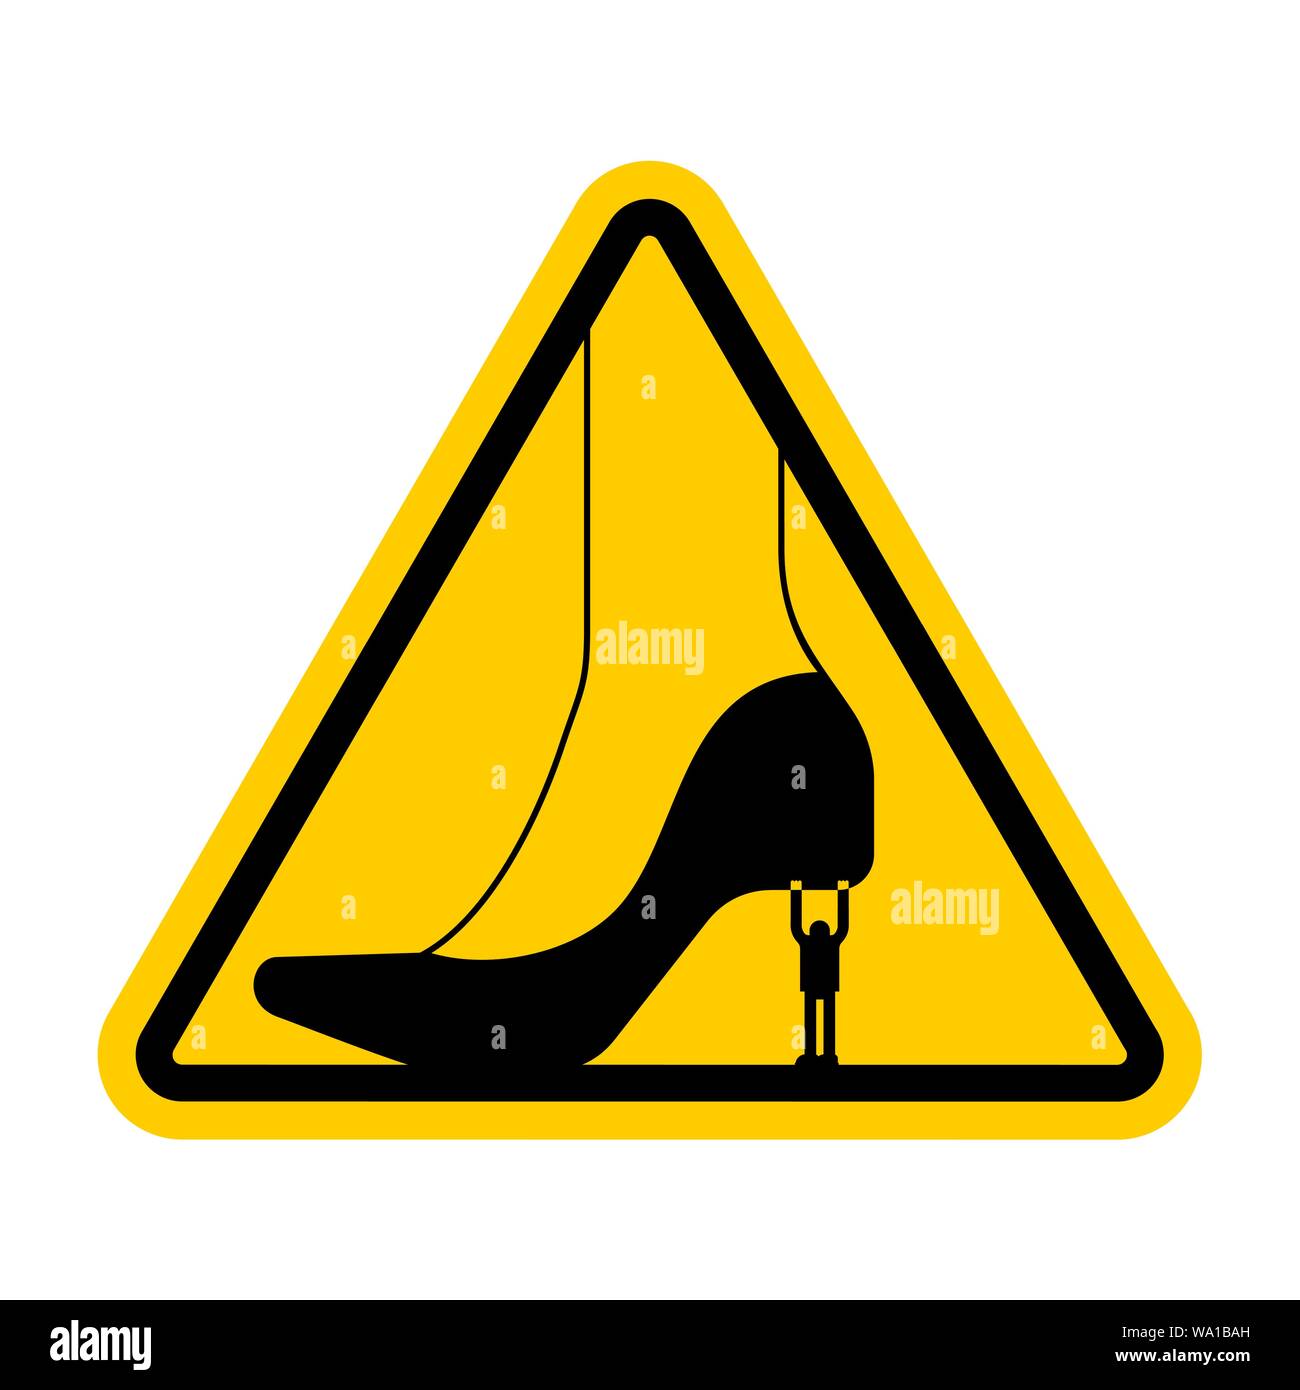 Attention Henpecked man. Warning yellow road sign. Caution guy Holding woman shoe Stock Vector